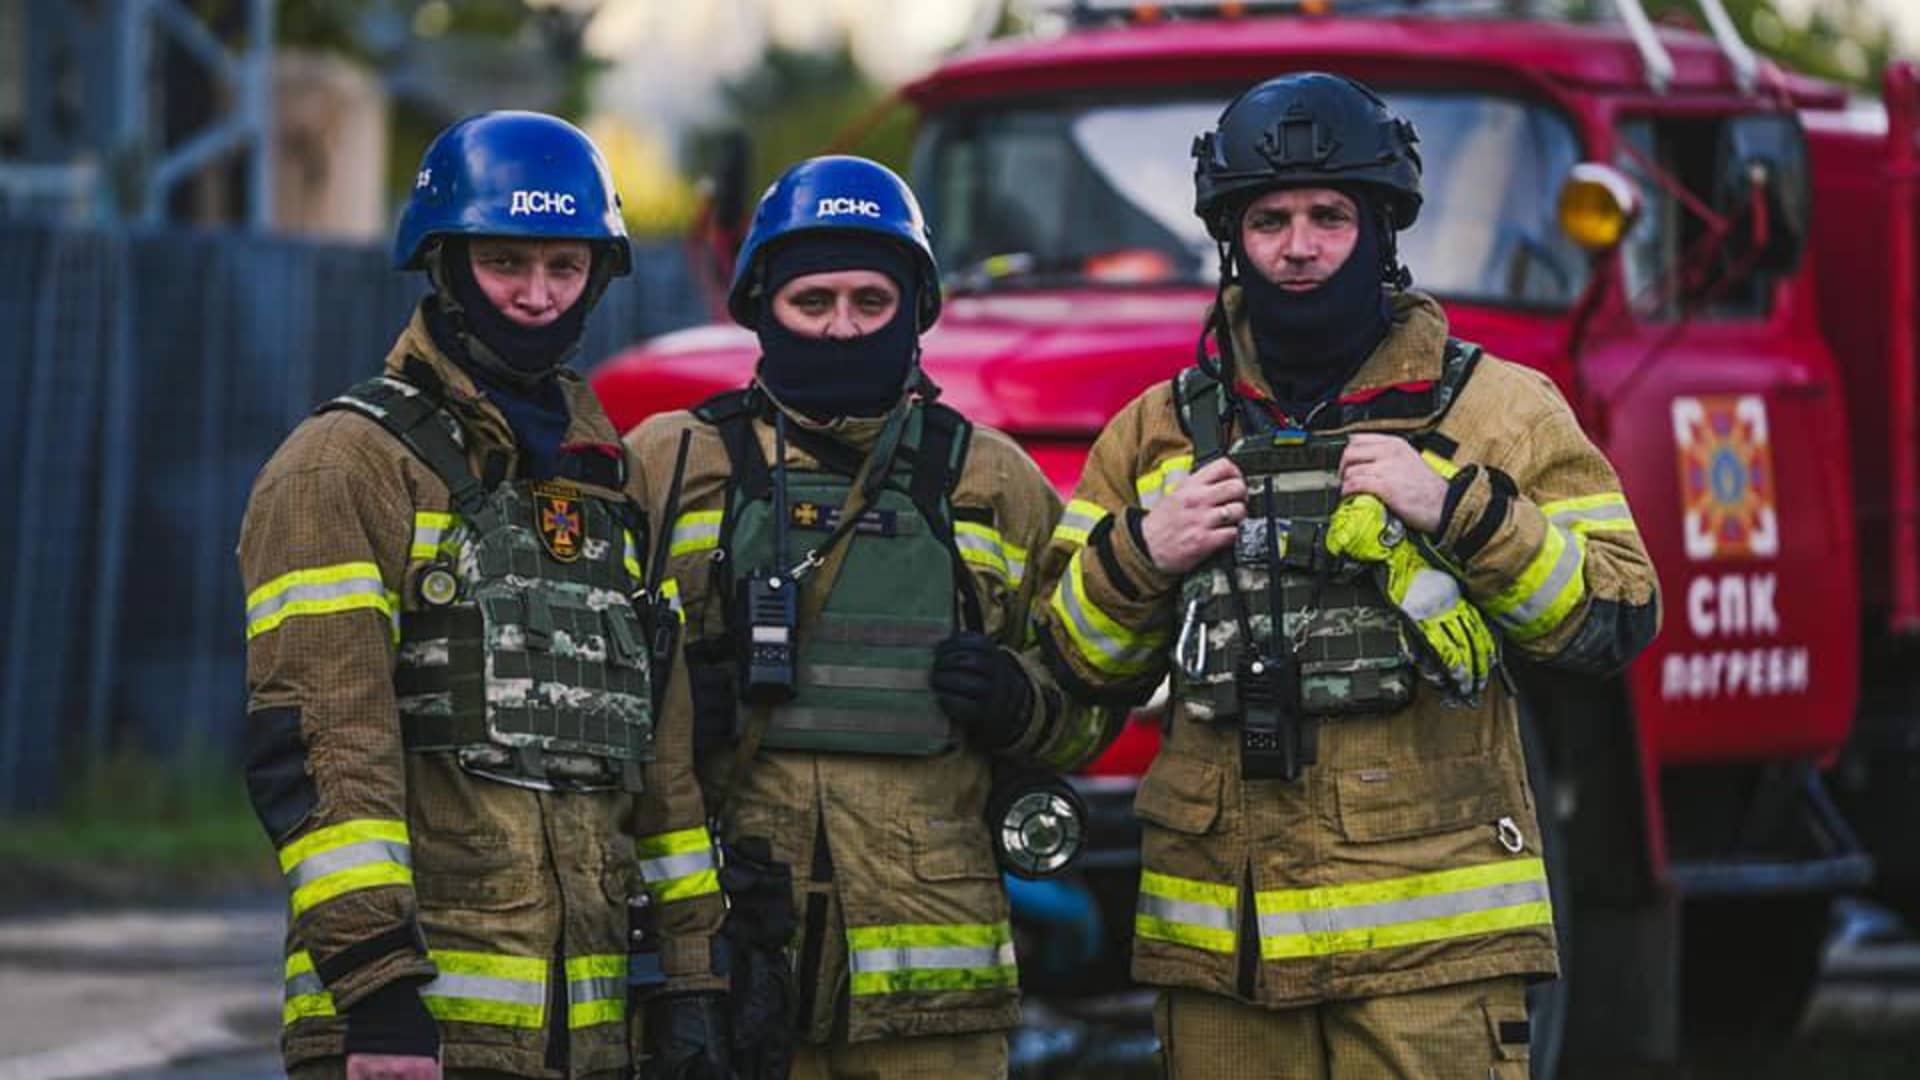 Members of emergency services respond to a fire after a Russian attack targeted energy infrastructure in Kyiv, Ukraine, on Oct. 18, 2022.